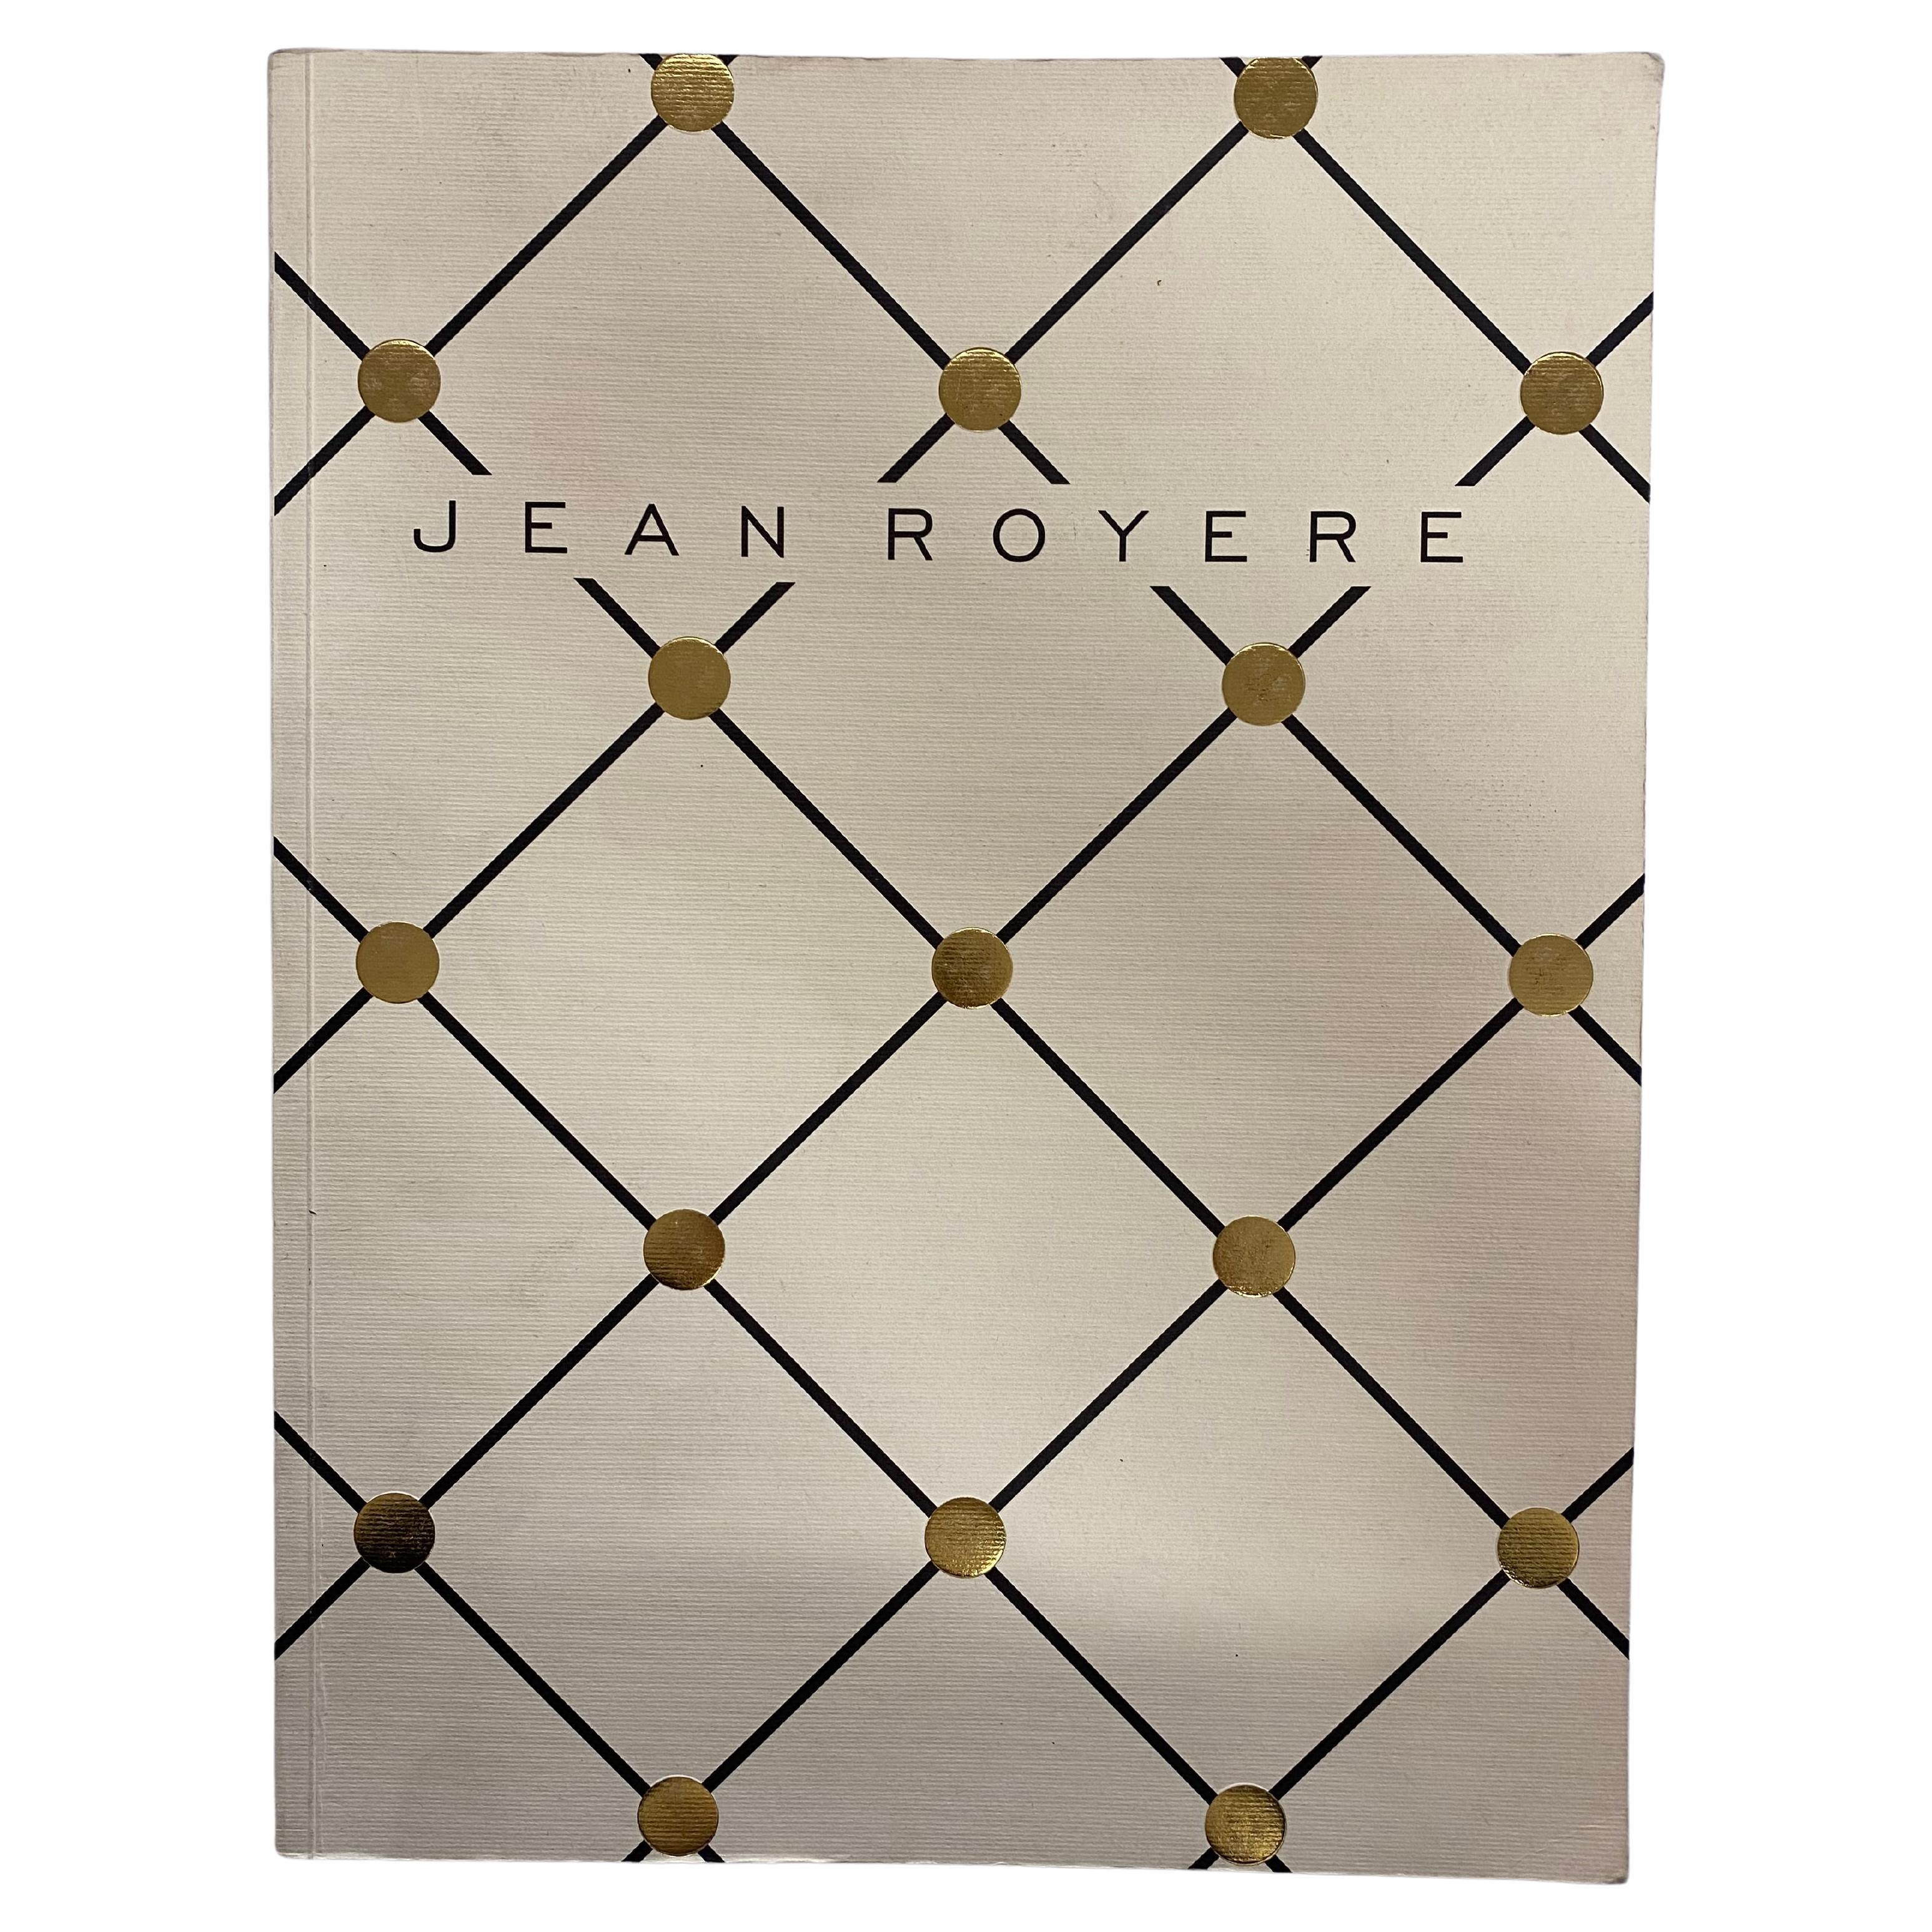 Jean Royere by Catherine & Stephane De Beyrie & Jacques Ouaiss  (Book) For Sale